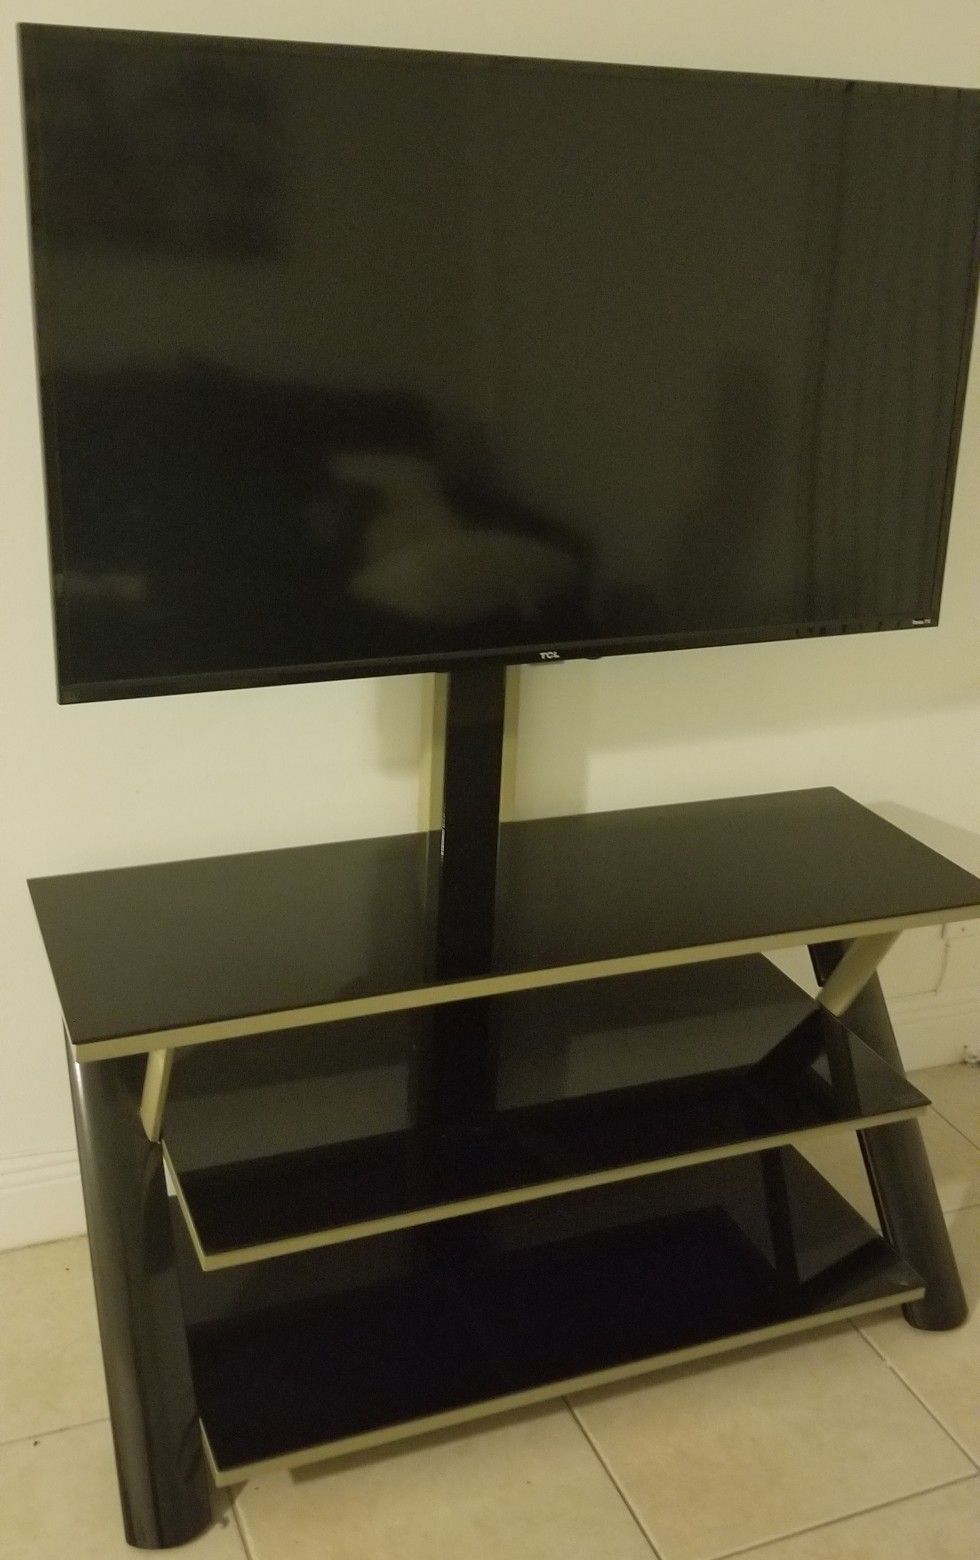 Flat panel TV stand up to 50"!!